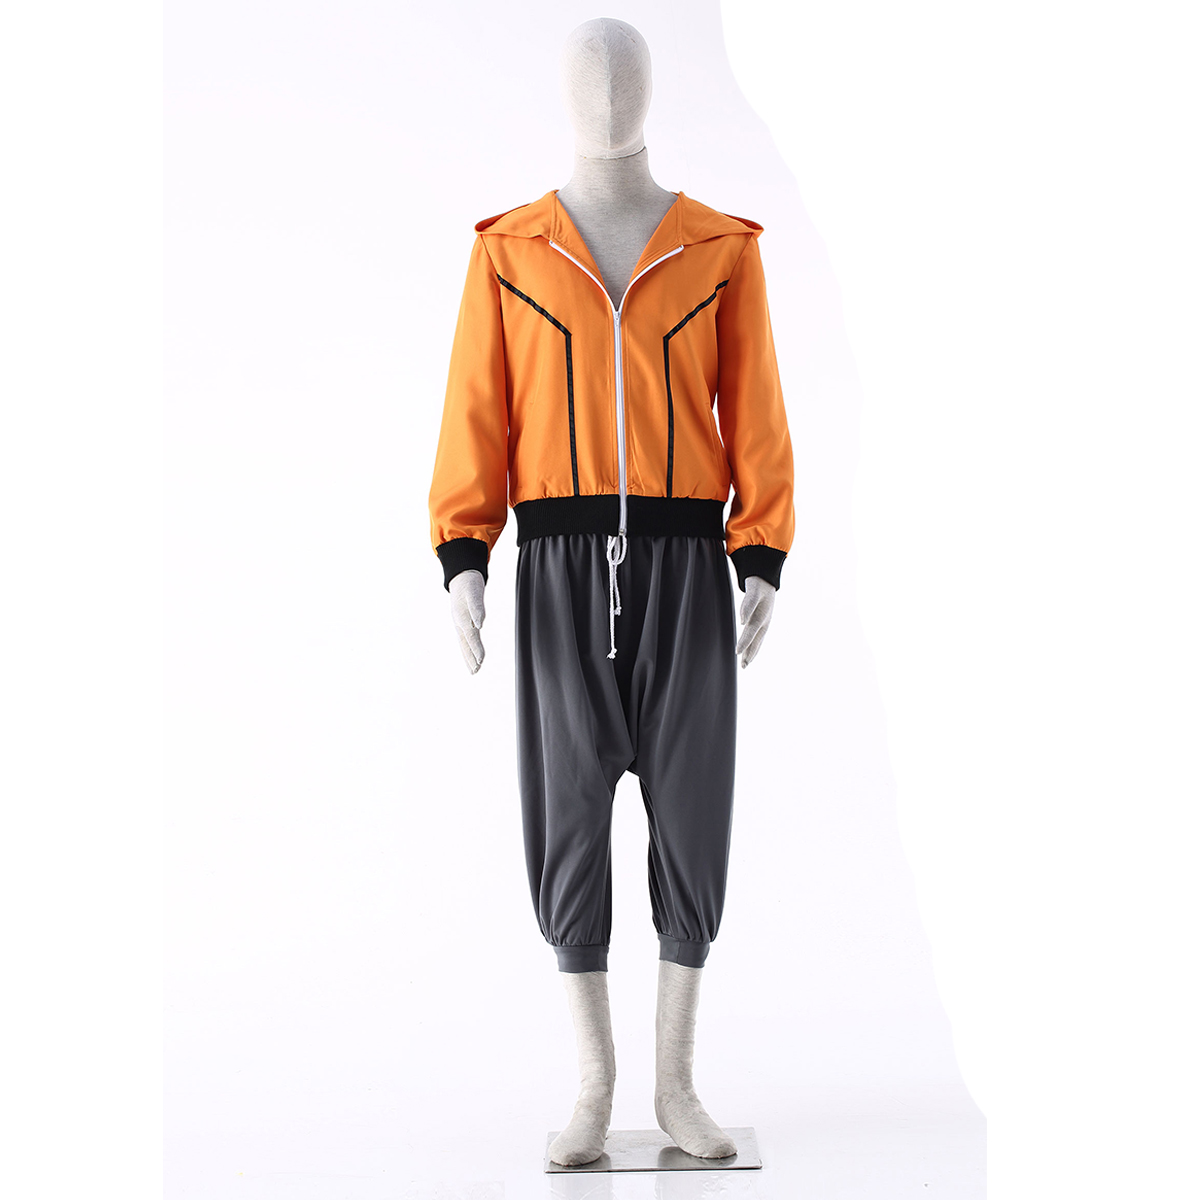 Naruto The Last Naruto 9 Anime Cosplay Costumes Outfit